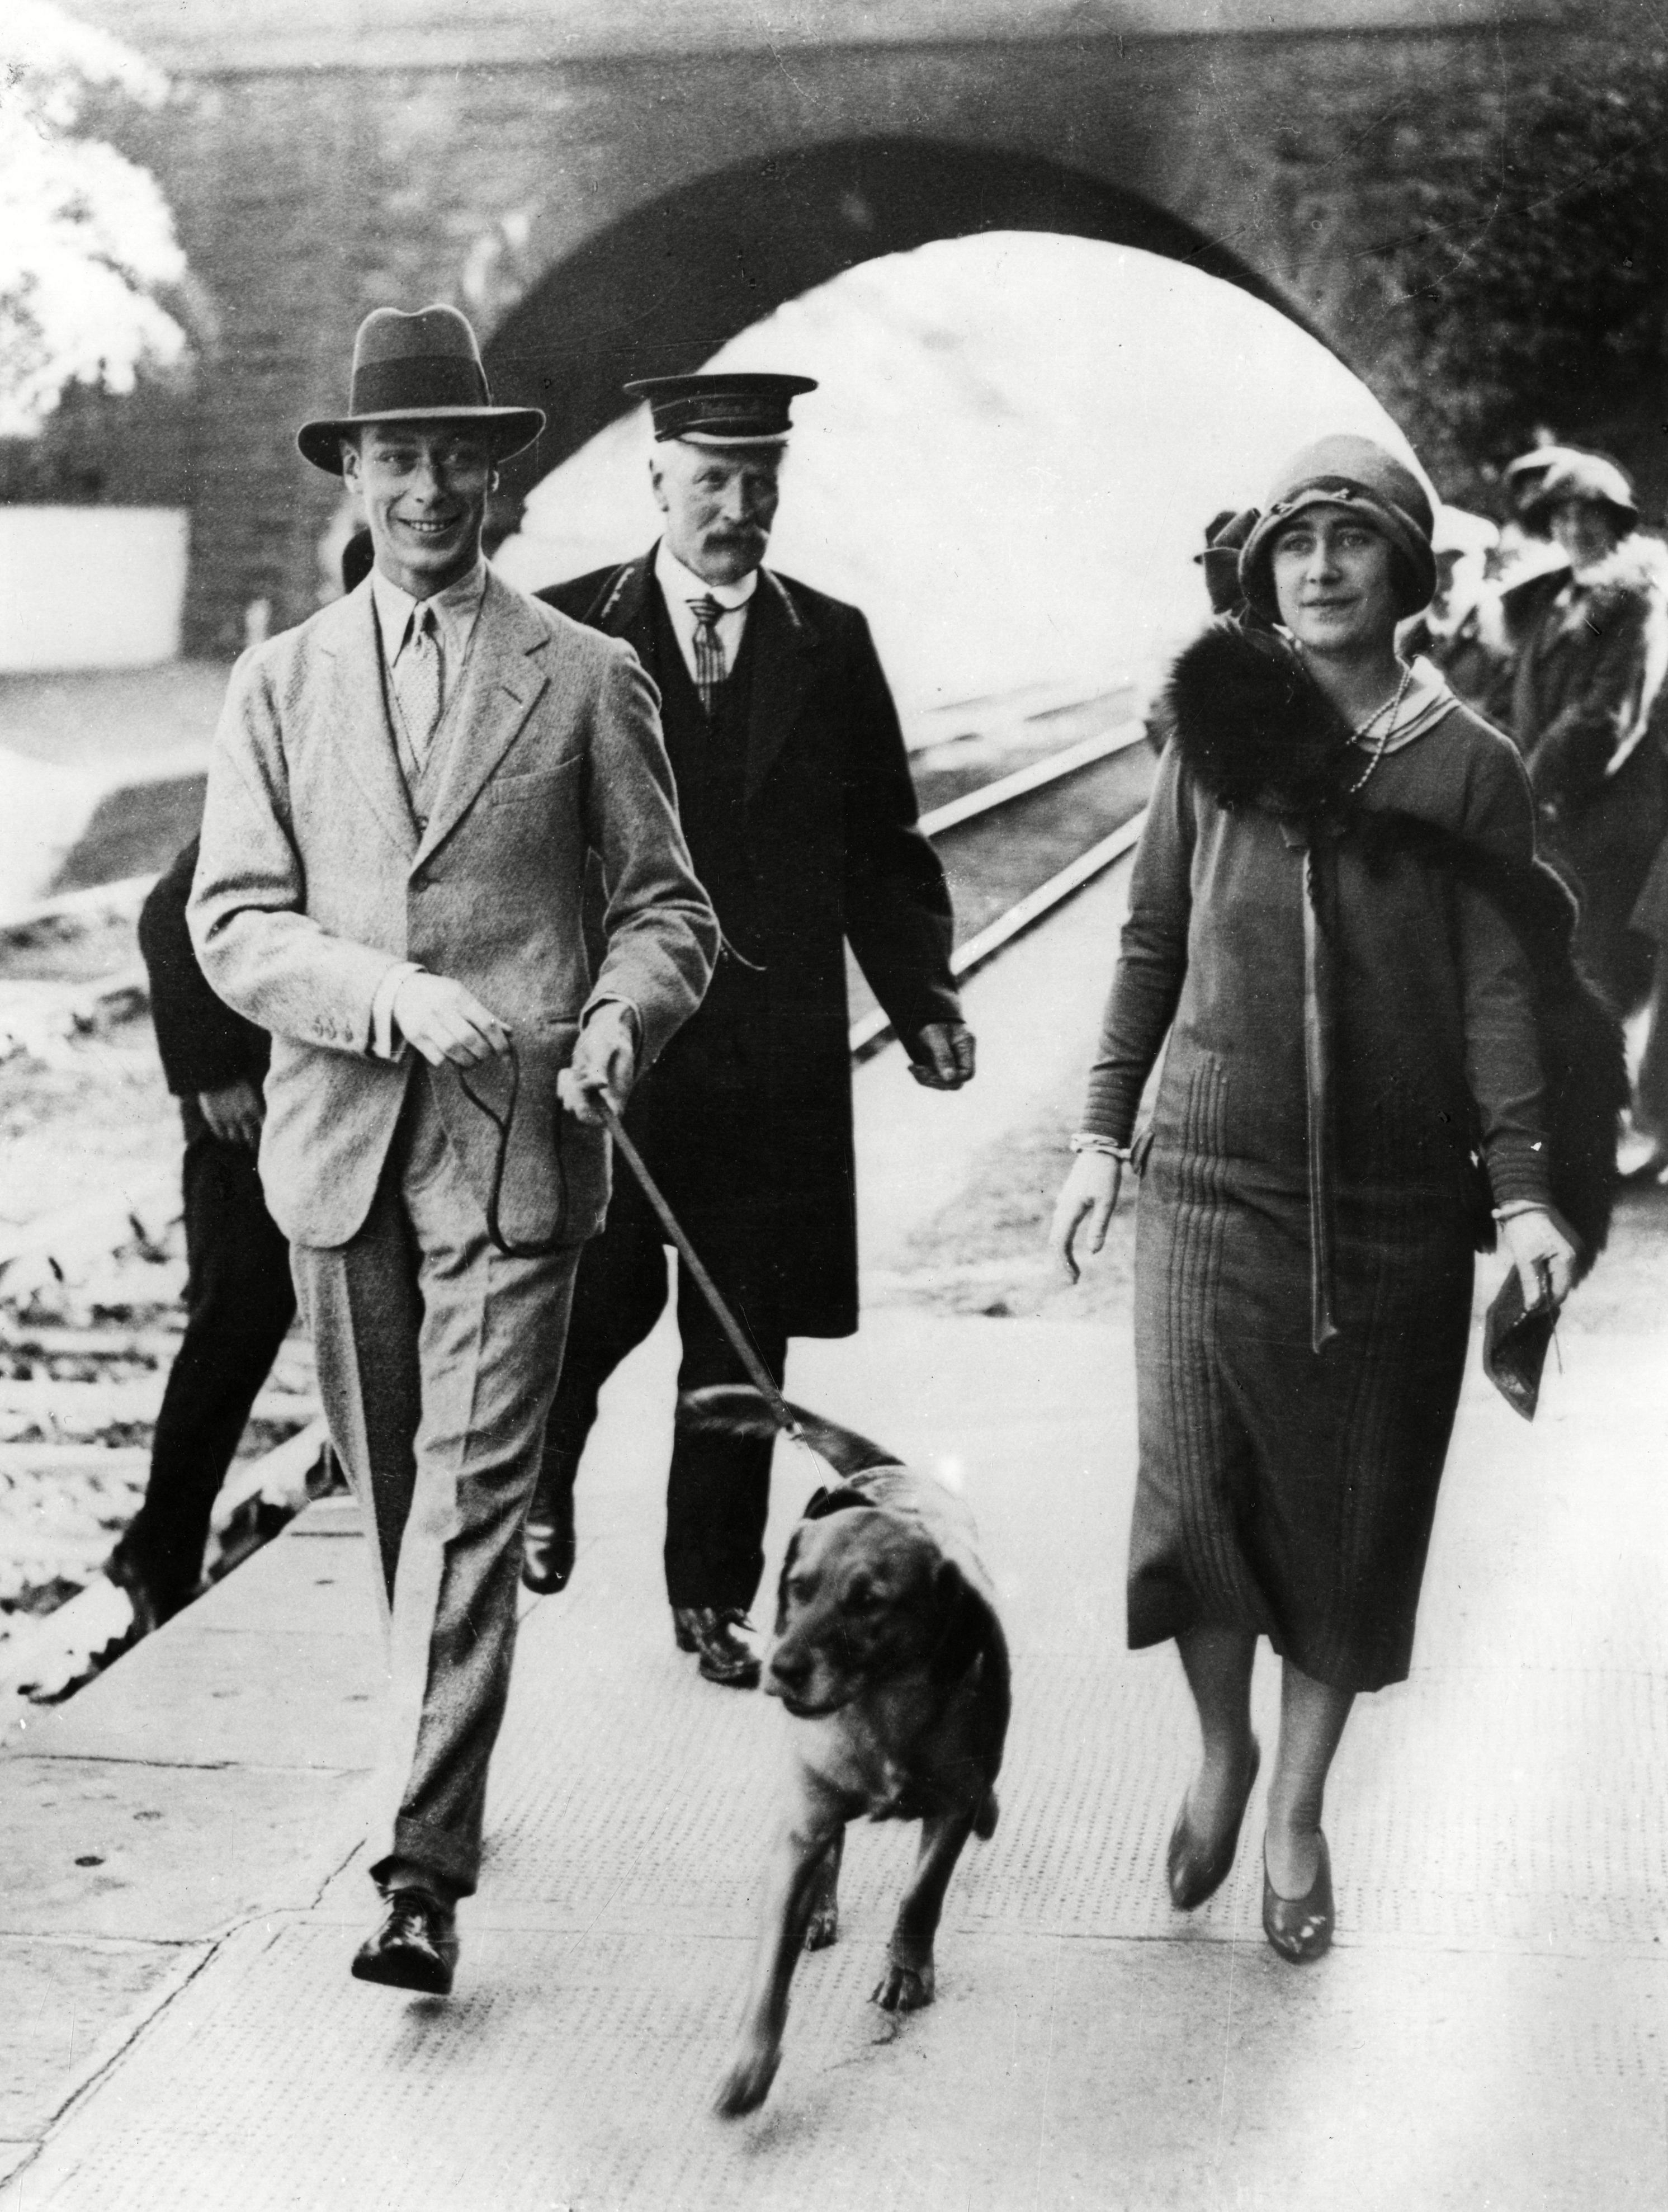 <p>A smiling King George VI and Queen Elizabeth, later the Queen Mother, are seen in an undated photograph at Ballater Railway Station in Scotland dressed informally and accompanied by a leashed dog and a railway worker. Ballater was at the time the closest railway station to their Scottish residence, Balmoral Castle.</p>